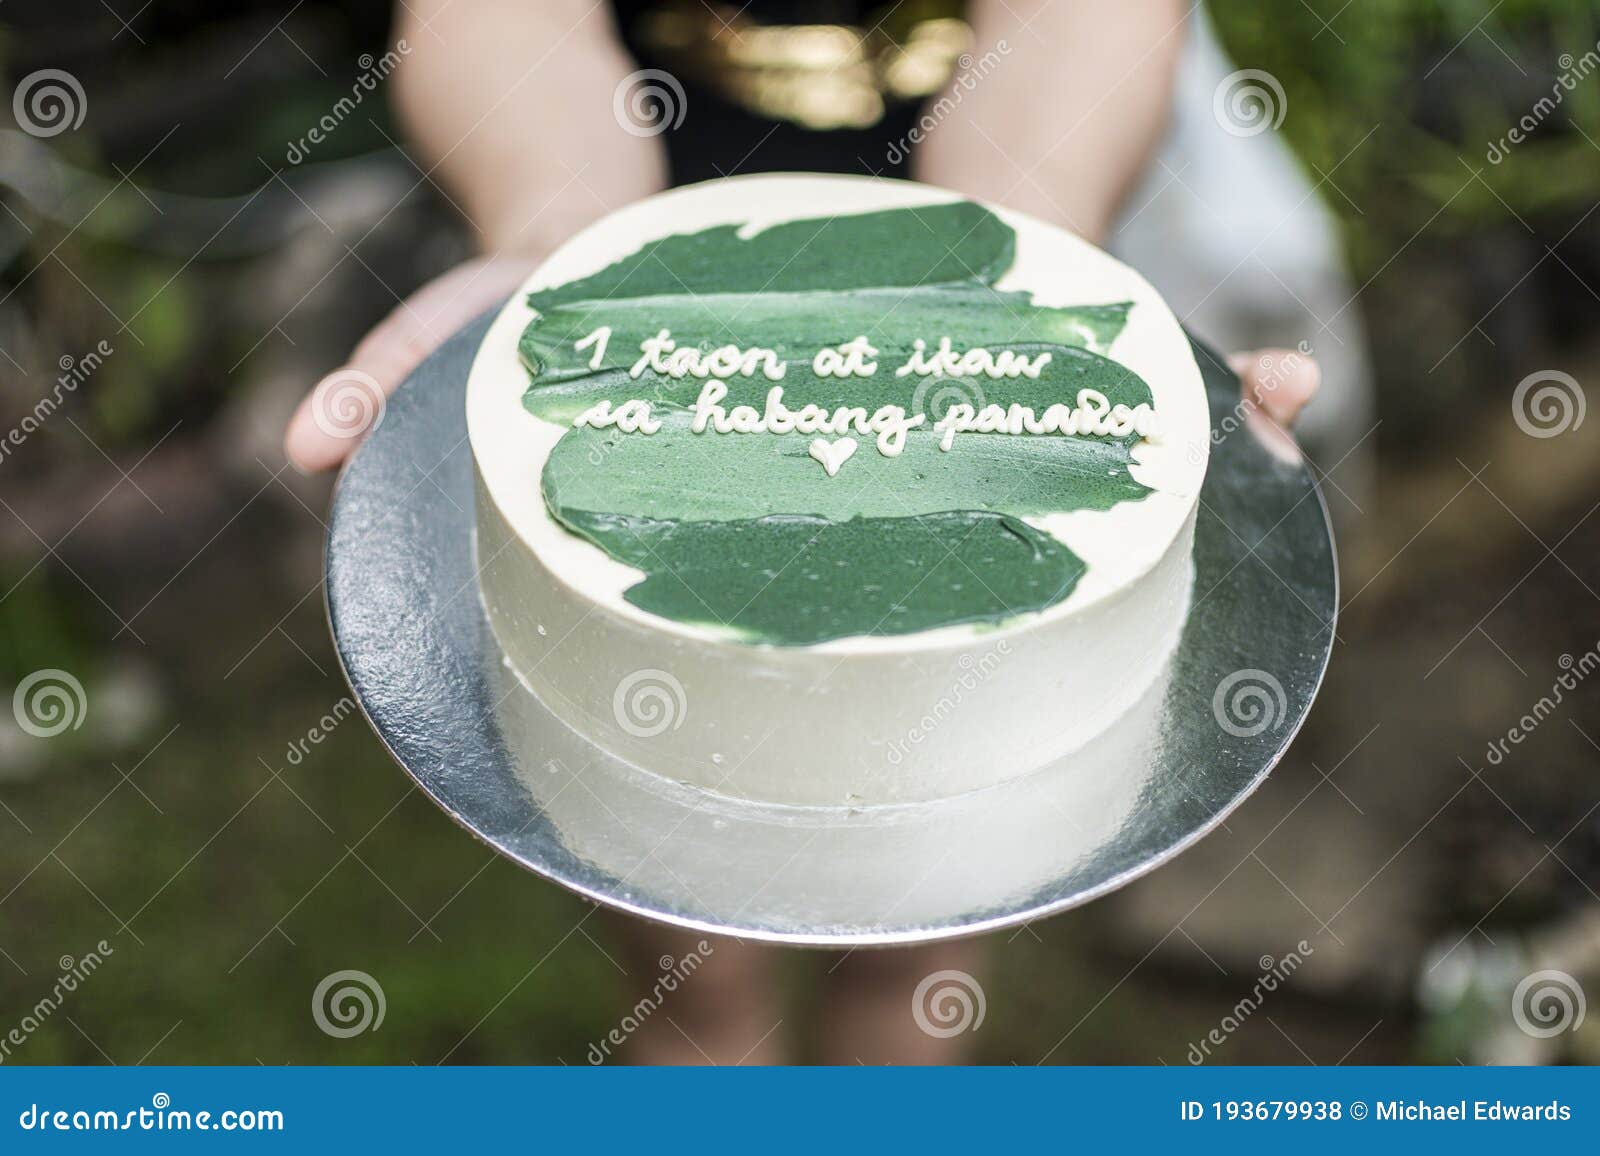 girlfriend handing over a small cake with green icing and a heartwarming message. tagalog words translated as 1 year and forever.